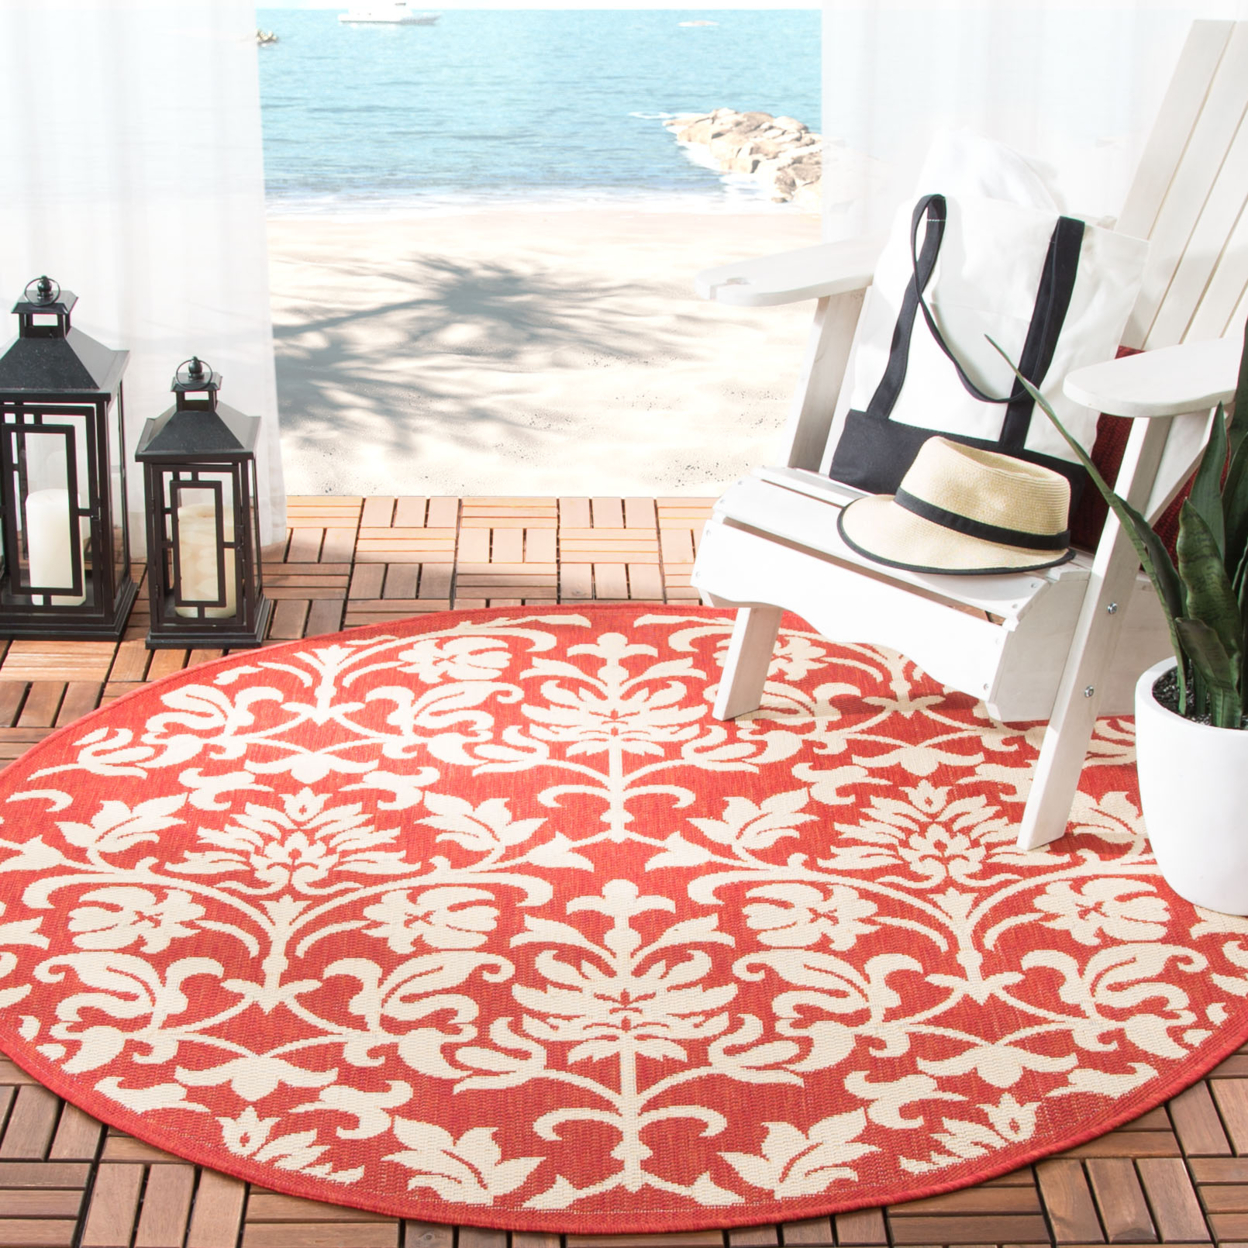 SAFAVIEH Courtyard Yvette Floral Indoor/Outdoor Area Rug, 5'3" x 7'7", Red/Natural - image 2 of 10